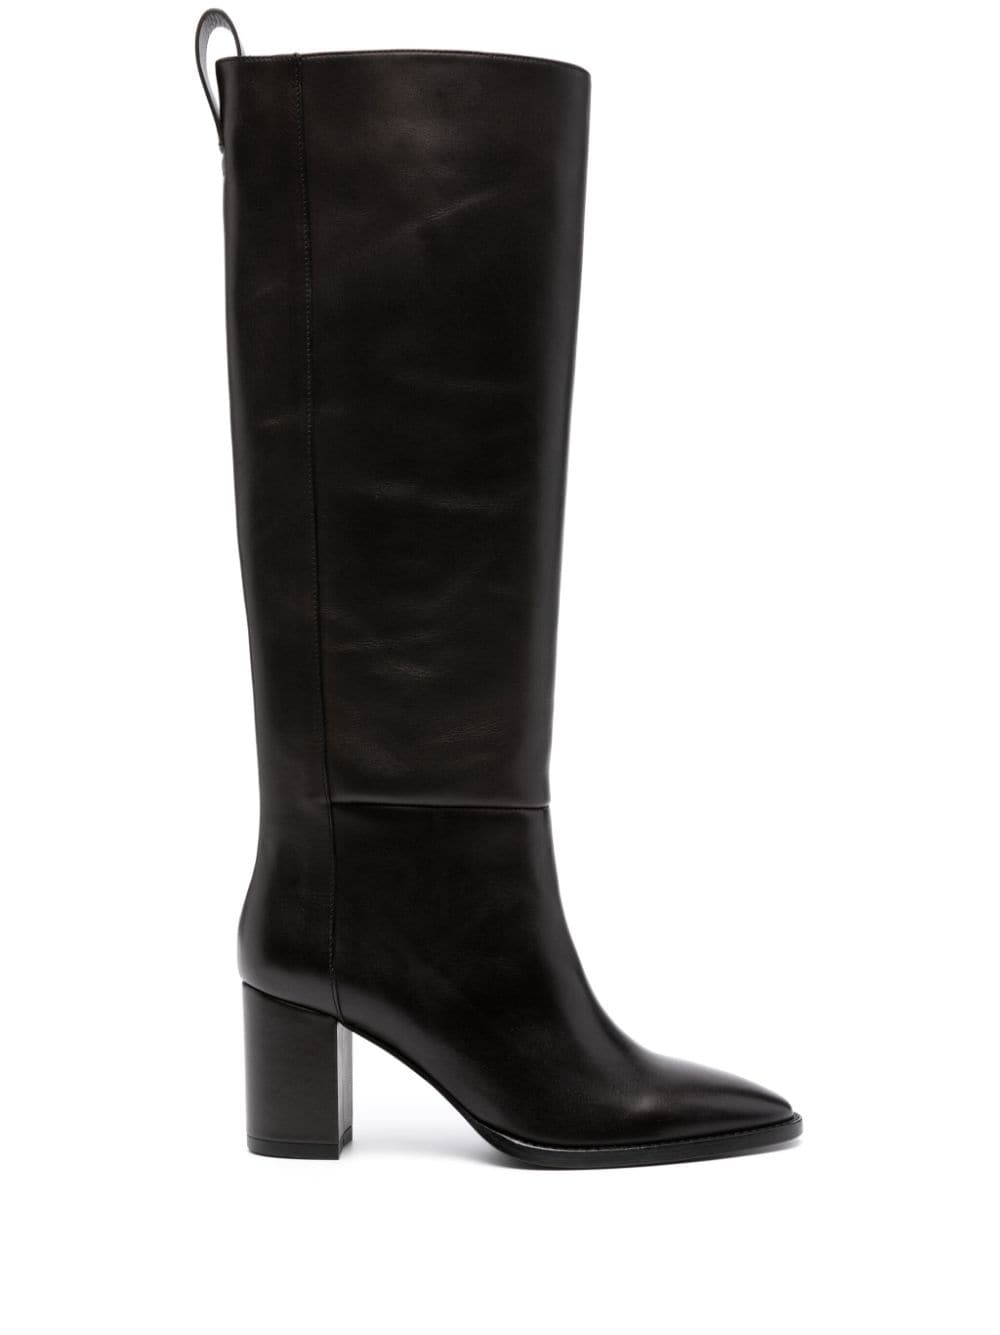 Rodebjer 70mm almond-toe knee-length Boots - Farfetch